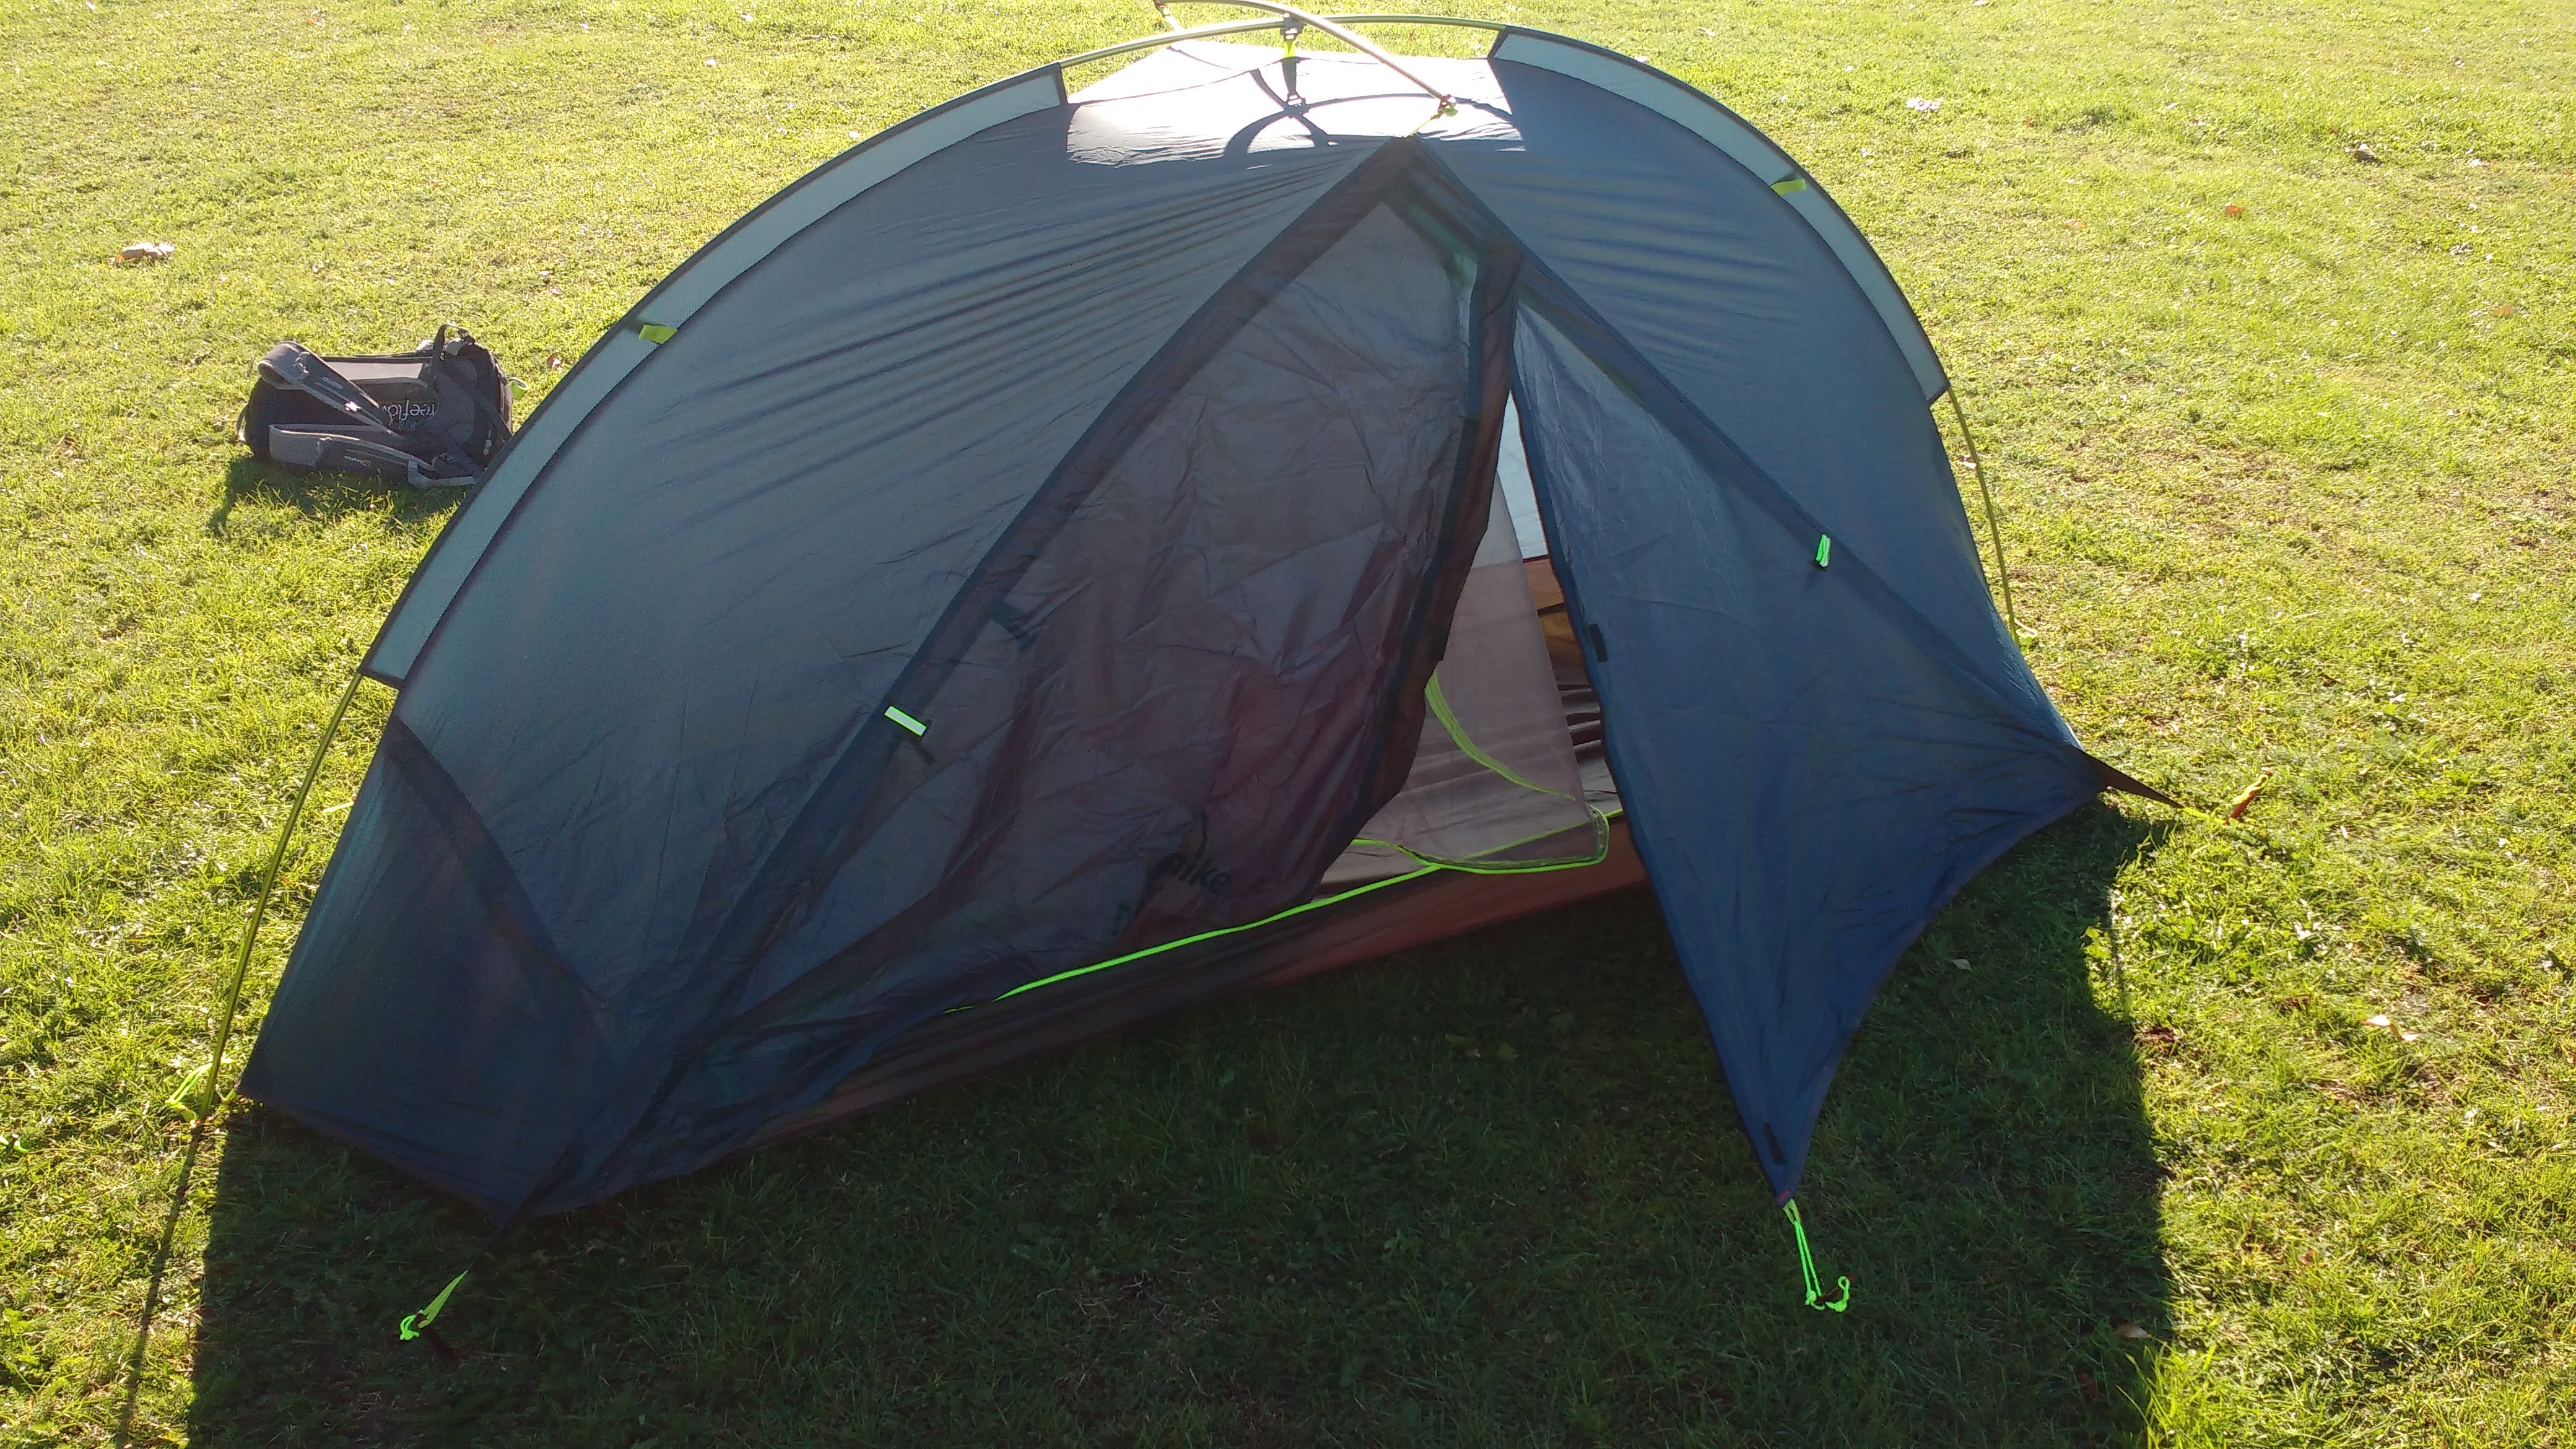 The Naturehike Taga Lightweight Tent Review - Thrifty Hiker